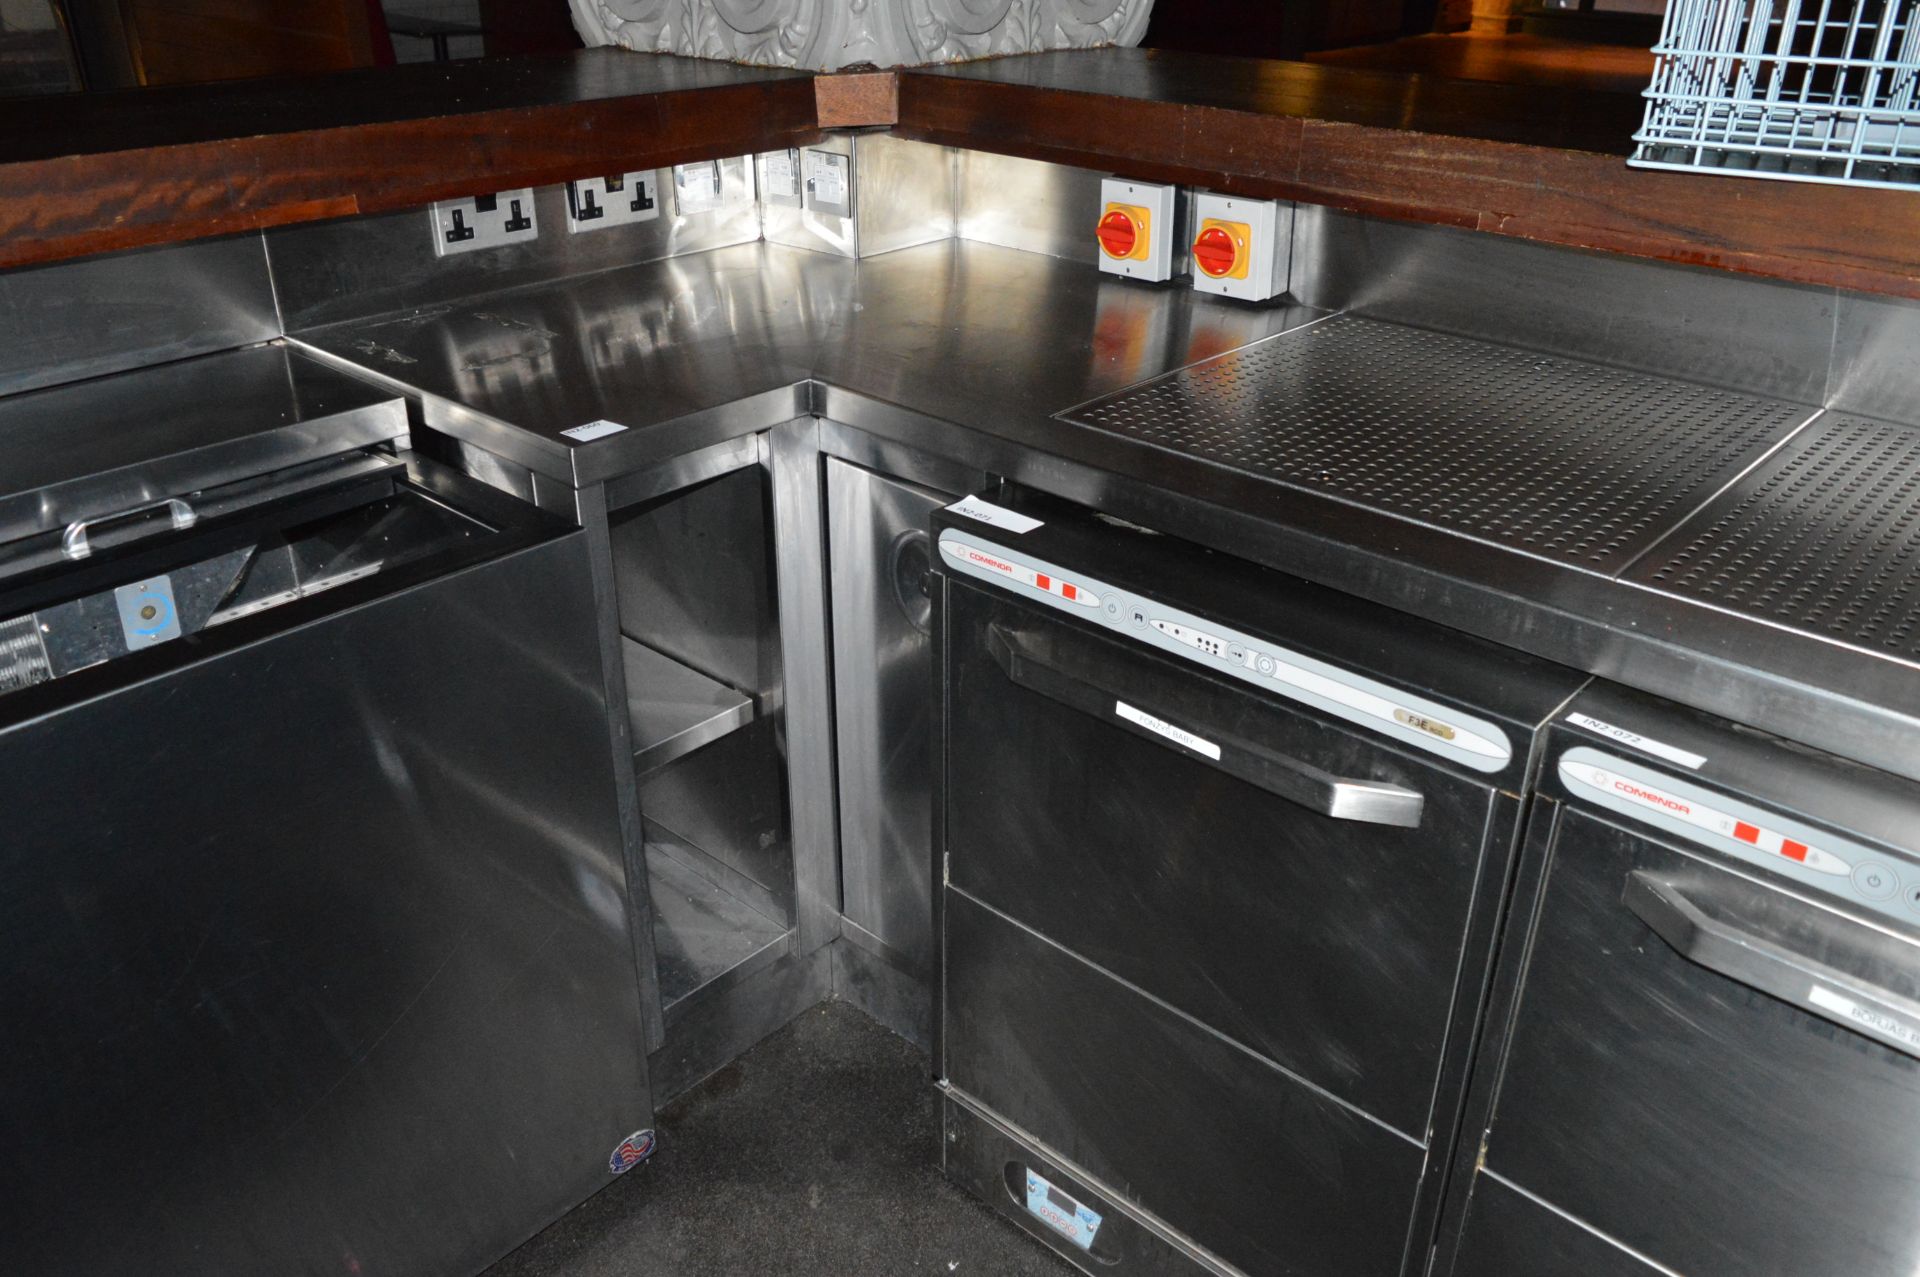 1 x Stainless Steel Bar Server Unit With Wash Basins - More Info to Follow - CL350 - Ref In2-060 - - Image 3 of 11